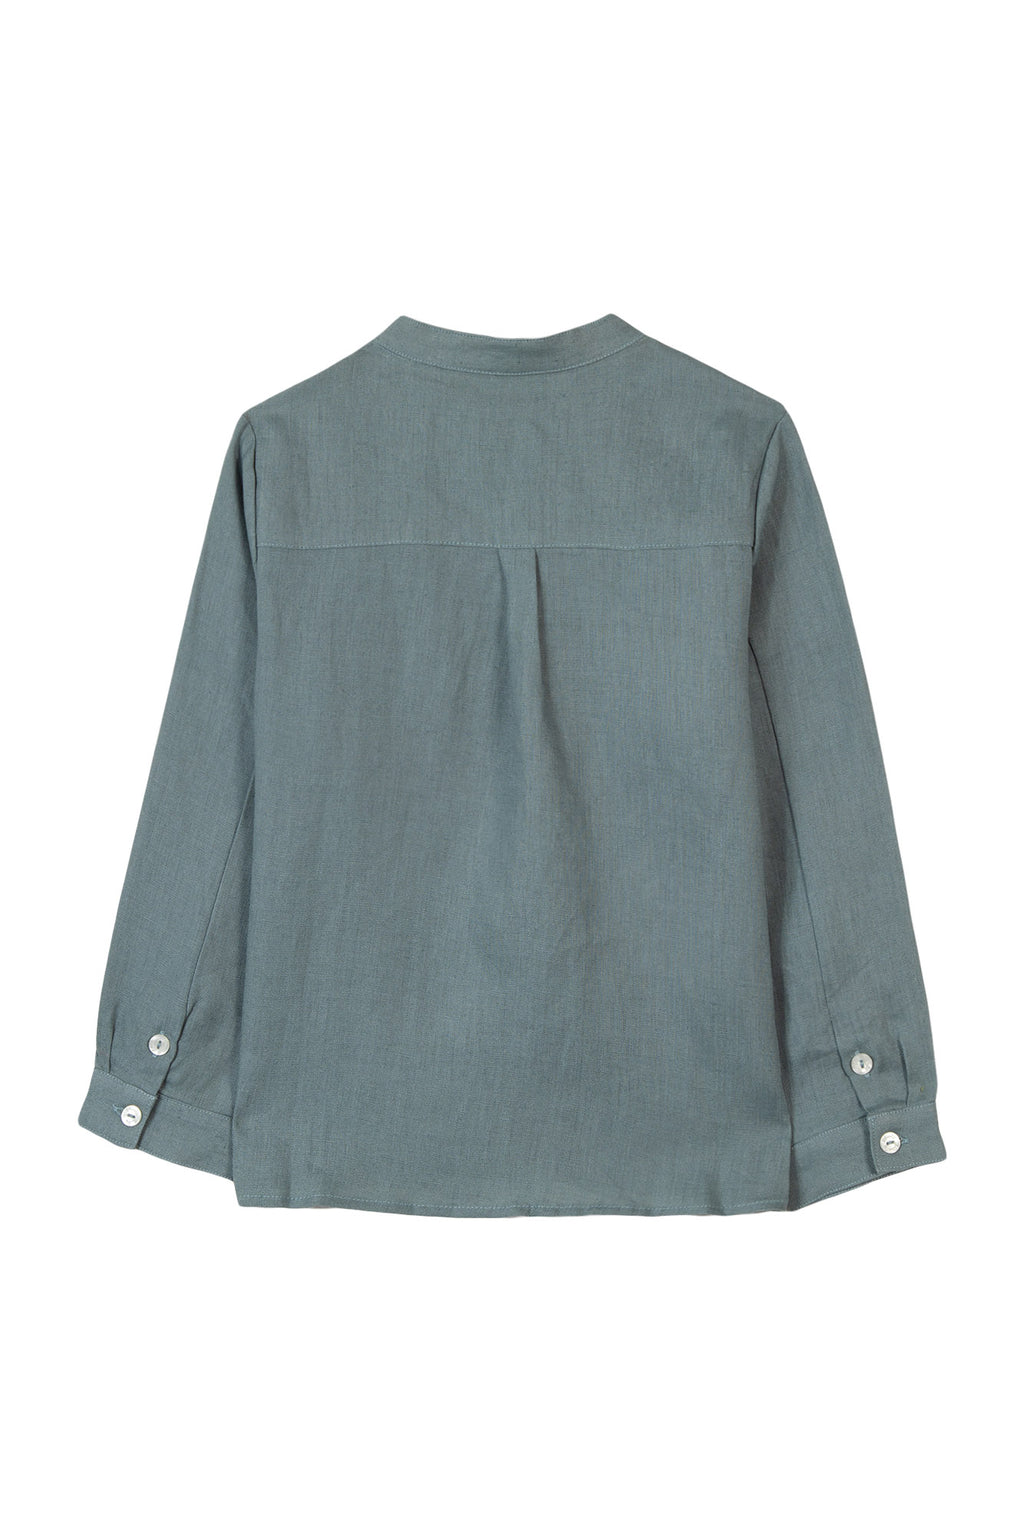 Chemise - Lin vert manches longues